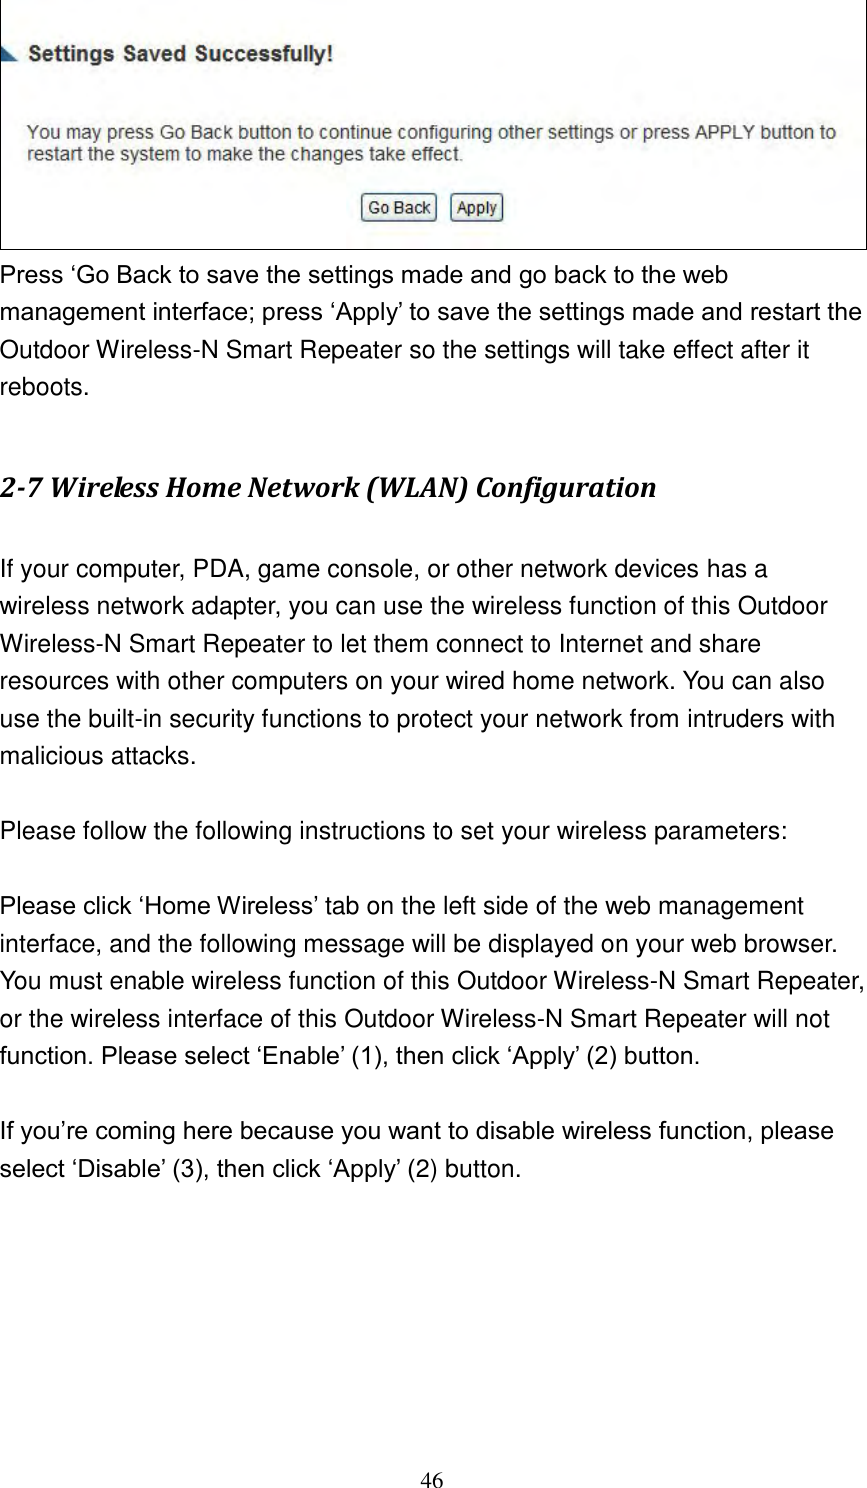 46  Press „Go Back to save the settings made and go back to the web management interface; press „Apply‟ to save the settings made and restart the Outdoor Wireless-N Smart Repeater so the settings will take effect after it reboots.  2-7 Wireless Home Network (WLAN) Configuration  If your computer, PDA, game console, or other network devices has a wireless network adapter, you can use the wireless function of this Outdoor Wireless-N Smart Repeater to let them connect to Internet and share resources with other computers on your wired home network. You can also use the built-in security functions to protect your network from intruders with malicious attacks.  Please follow the following instructions to set your wireless parameters:  Please click „Home Wireless‟ tab on the left side of the web management interface, and the following message will be displayed on your web browser. You must enable wireless function of this Outdoor Wireless-N Smart Repeater, or the wireless interface of this Outdoor Wireless-N Smart Repeater will not function. Please select „Enable‟ (1), then click „Apply‟ (2) button.    If you‟re coming here because you want to disable wireless function, please select „Disable‟ (3), then click „Apply‟ (2) button.  